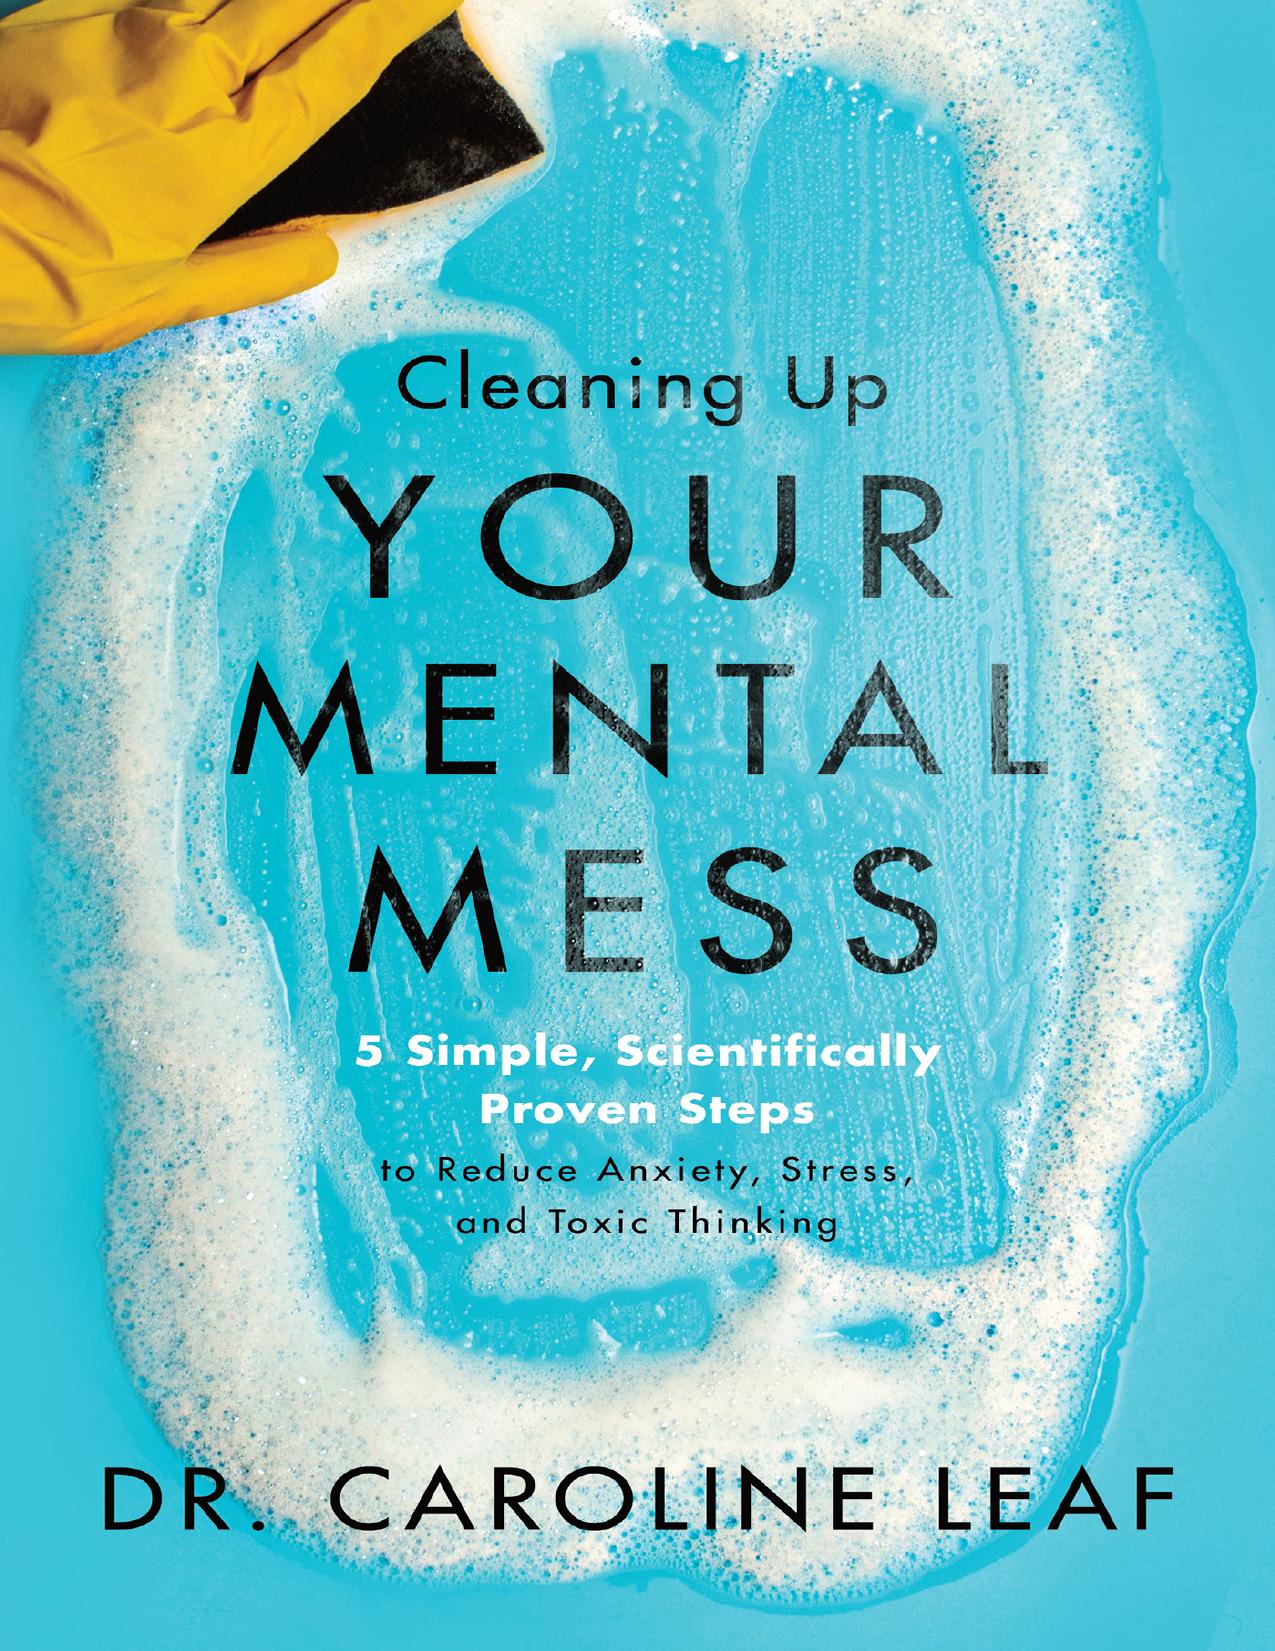 Cleaning Up Your Mental Mess by Dr. Caroline Leaf